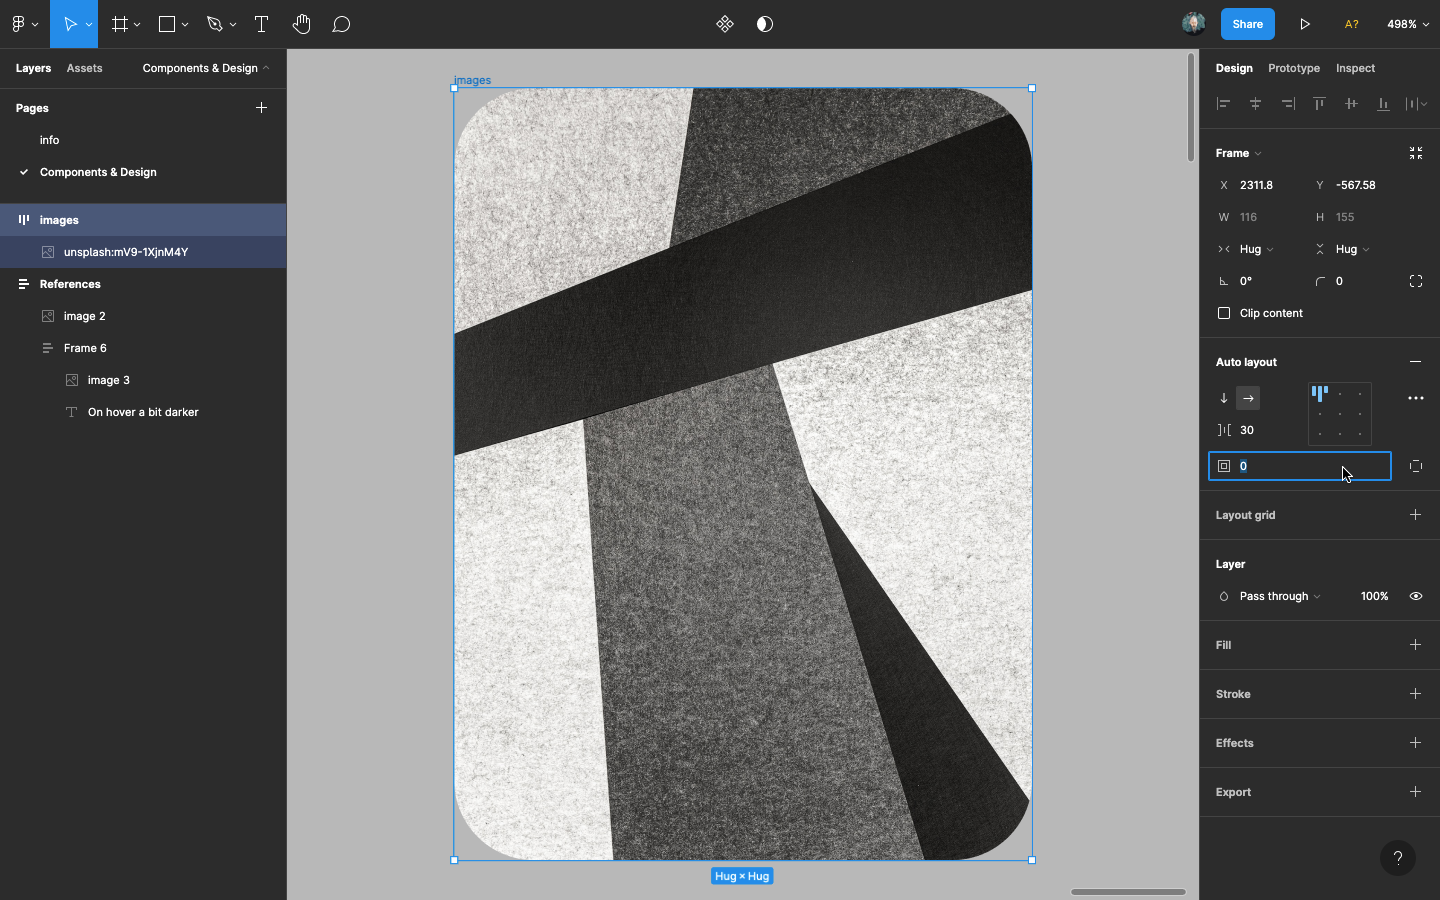 auto layout padding removed. Frame wrapping around the image with no extra padding.